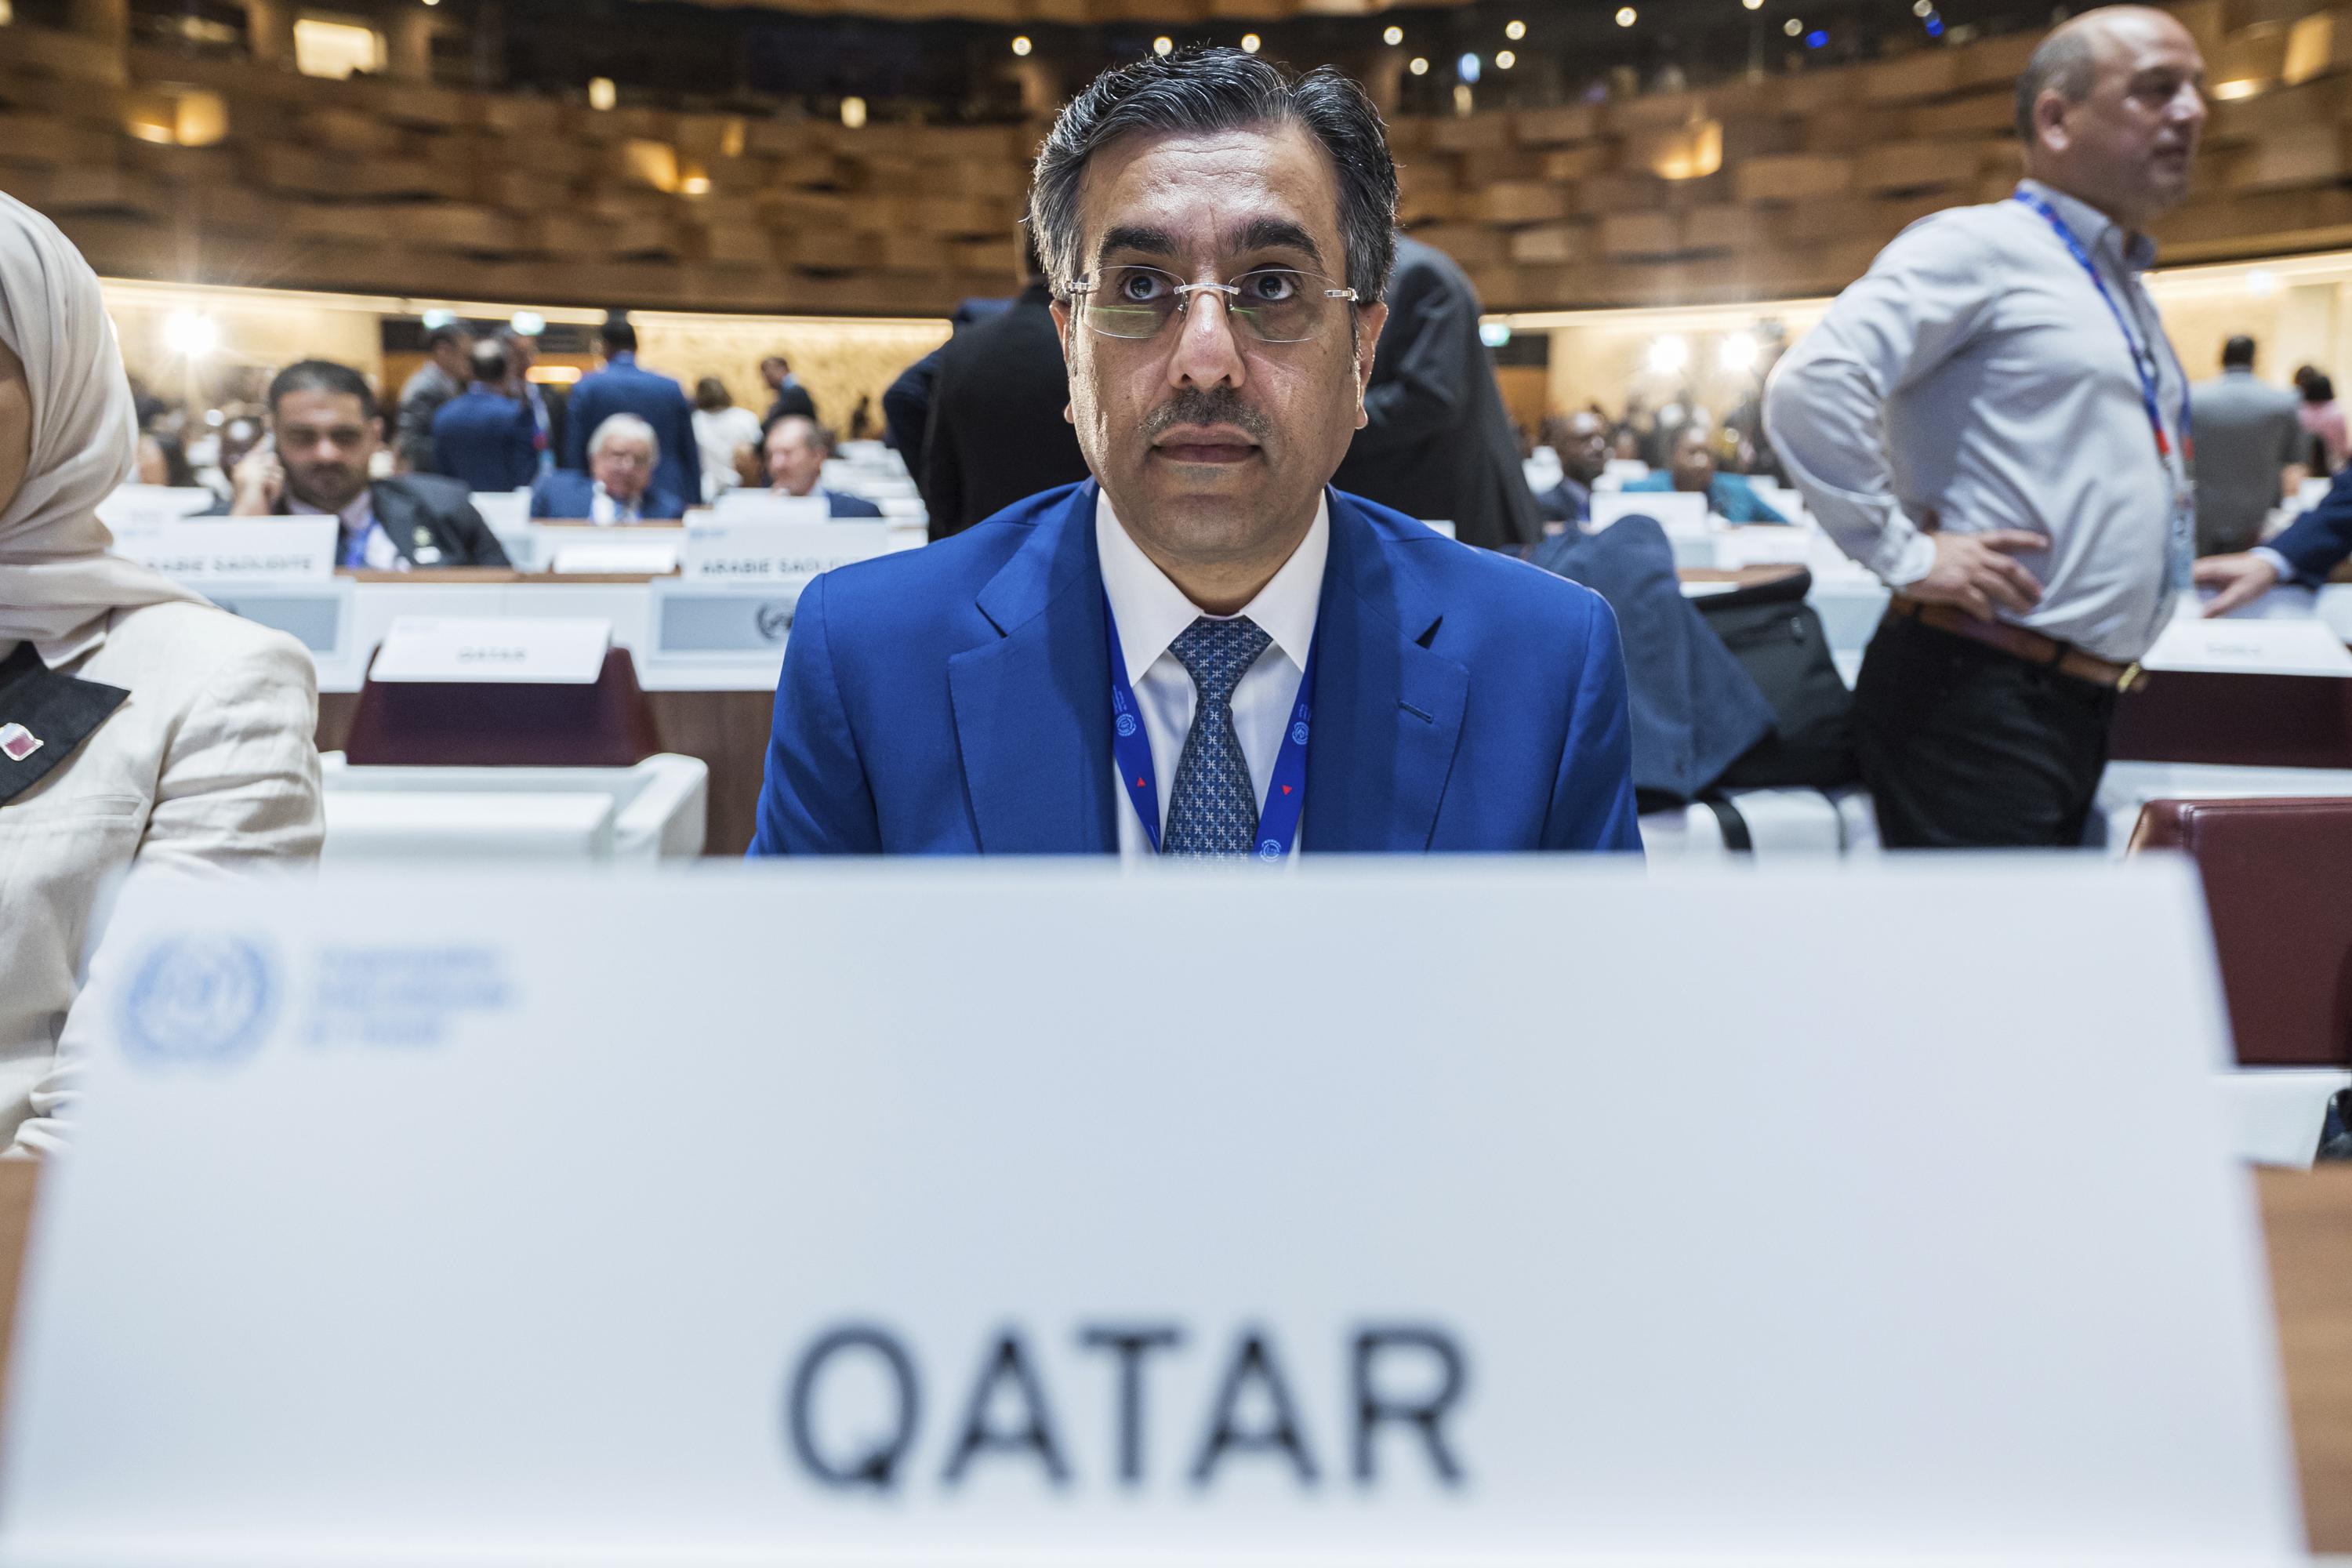 Qatar minister elected to head UN labor conference following World Cup scrutiny